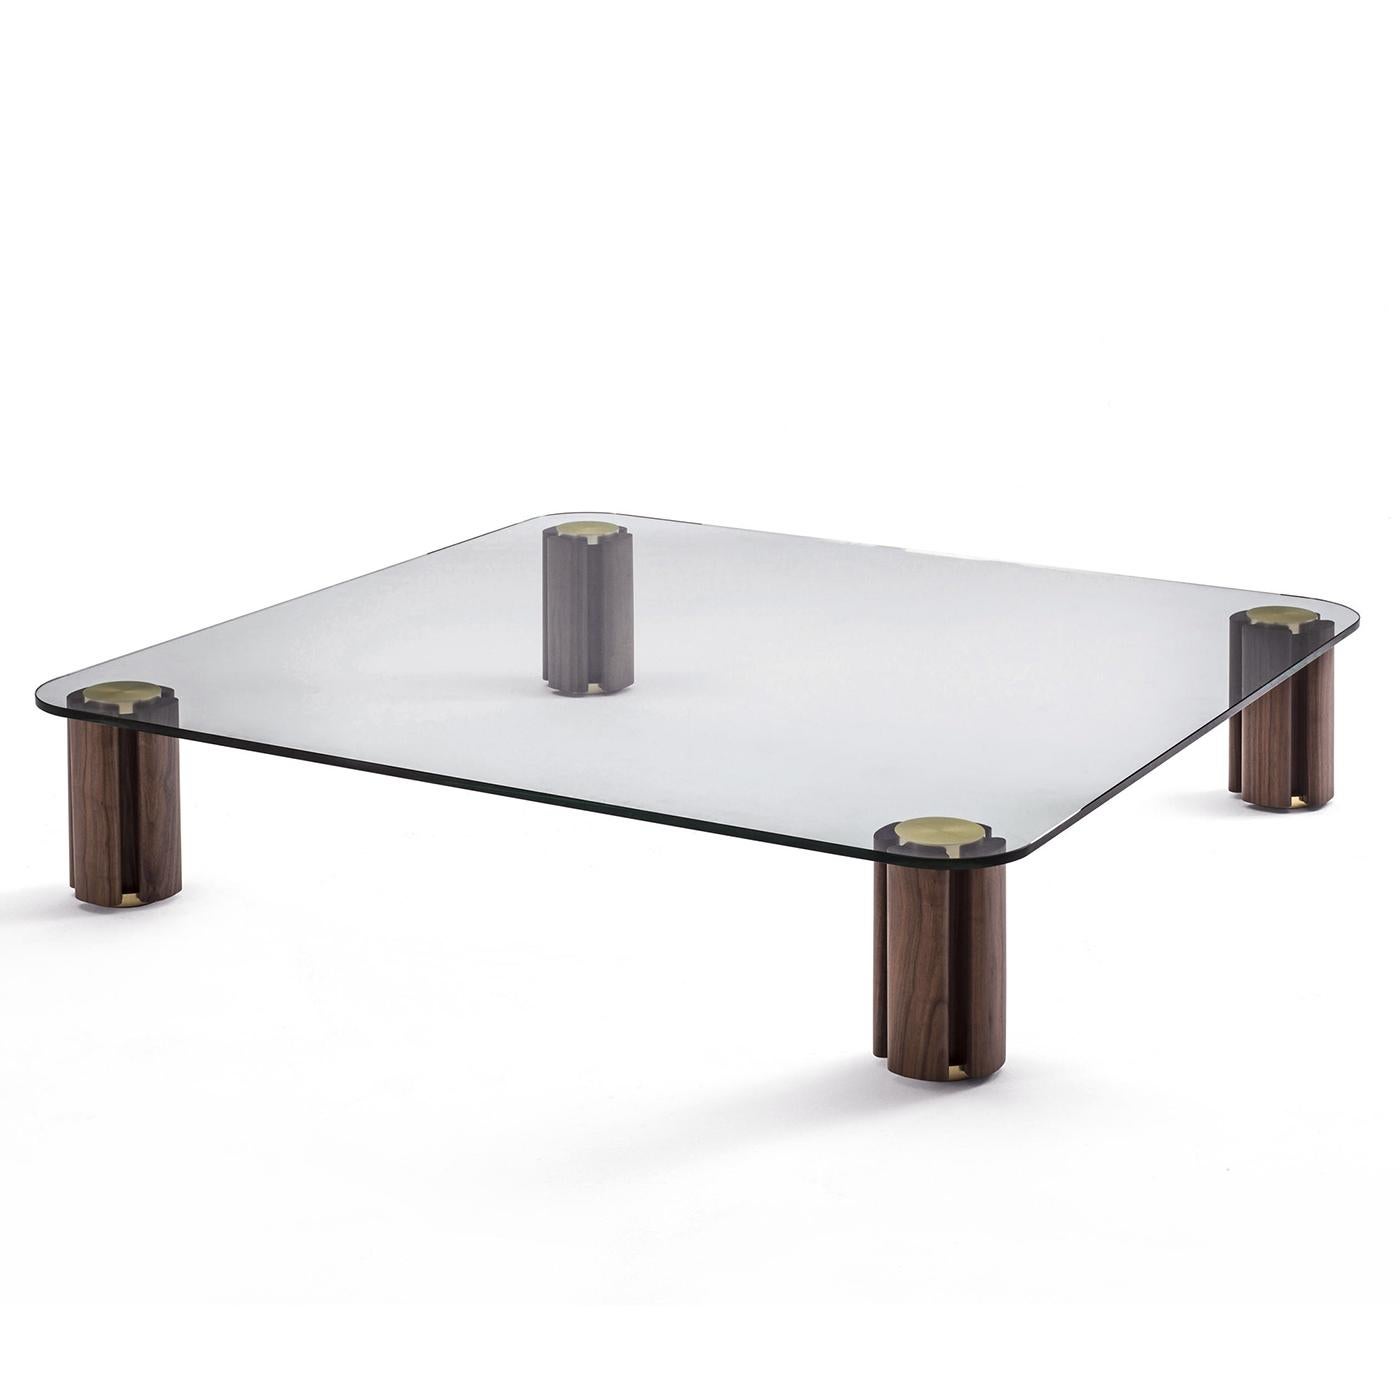 Coffee Table Mathilda Square with clear glass top,
15 mm thickness. With 4 feet made with solid walnut wood
with solid brass central poles in brushed finish.
L150xD150xH31cm, price: 10500,00€.
Also available in:
L130xD130xH31cm, price: